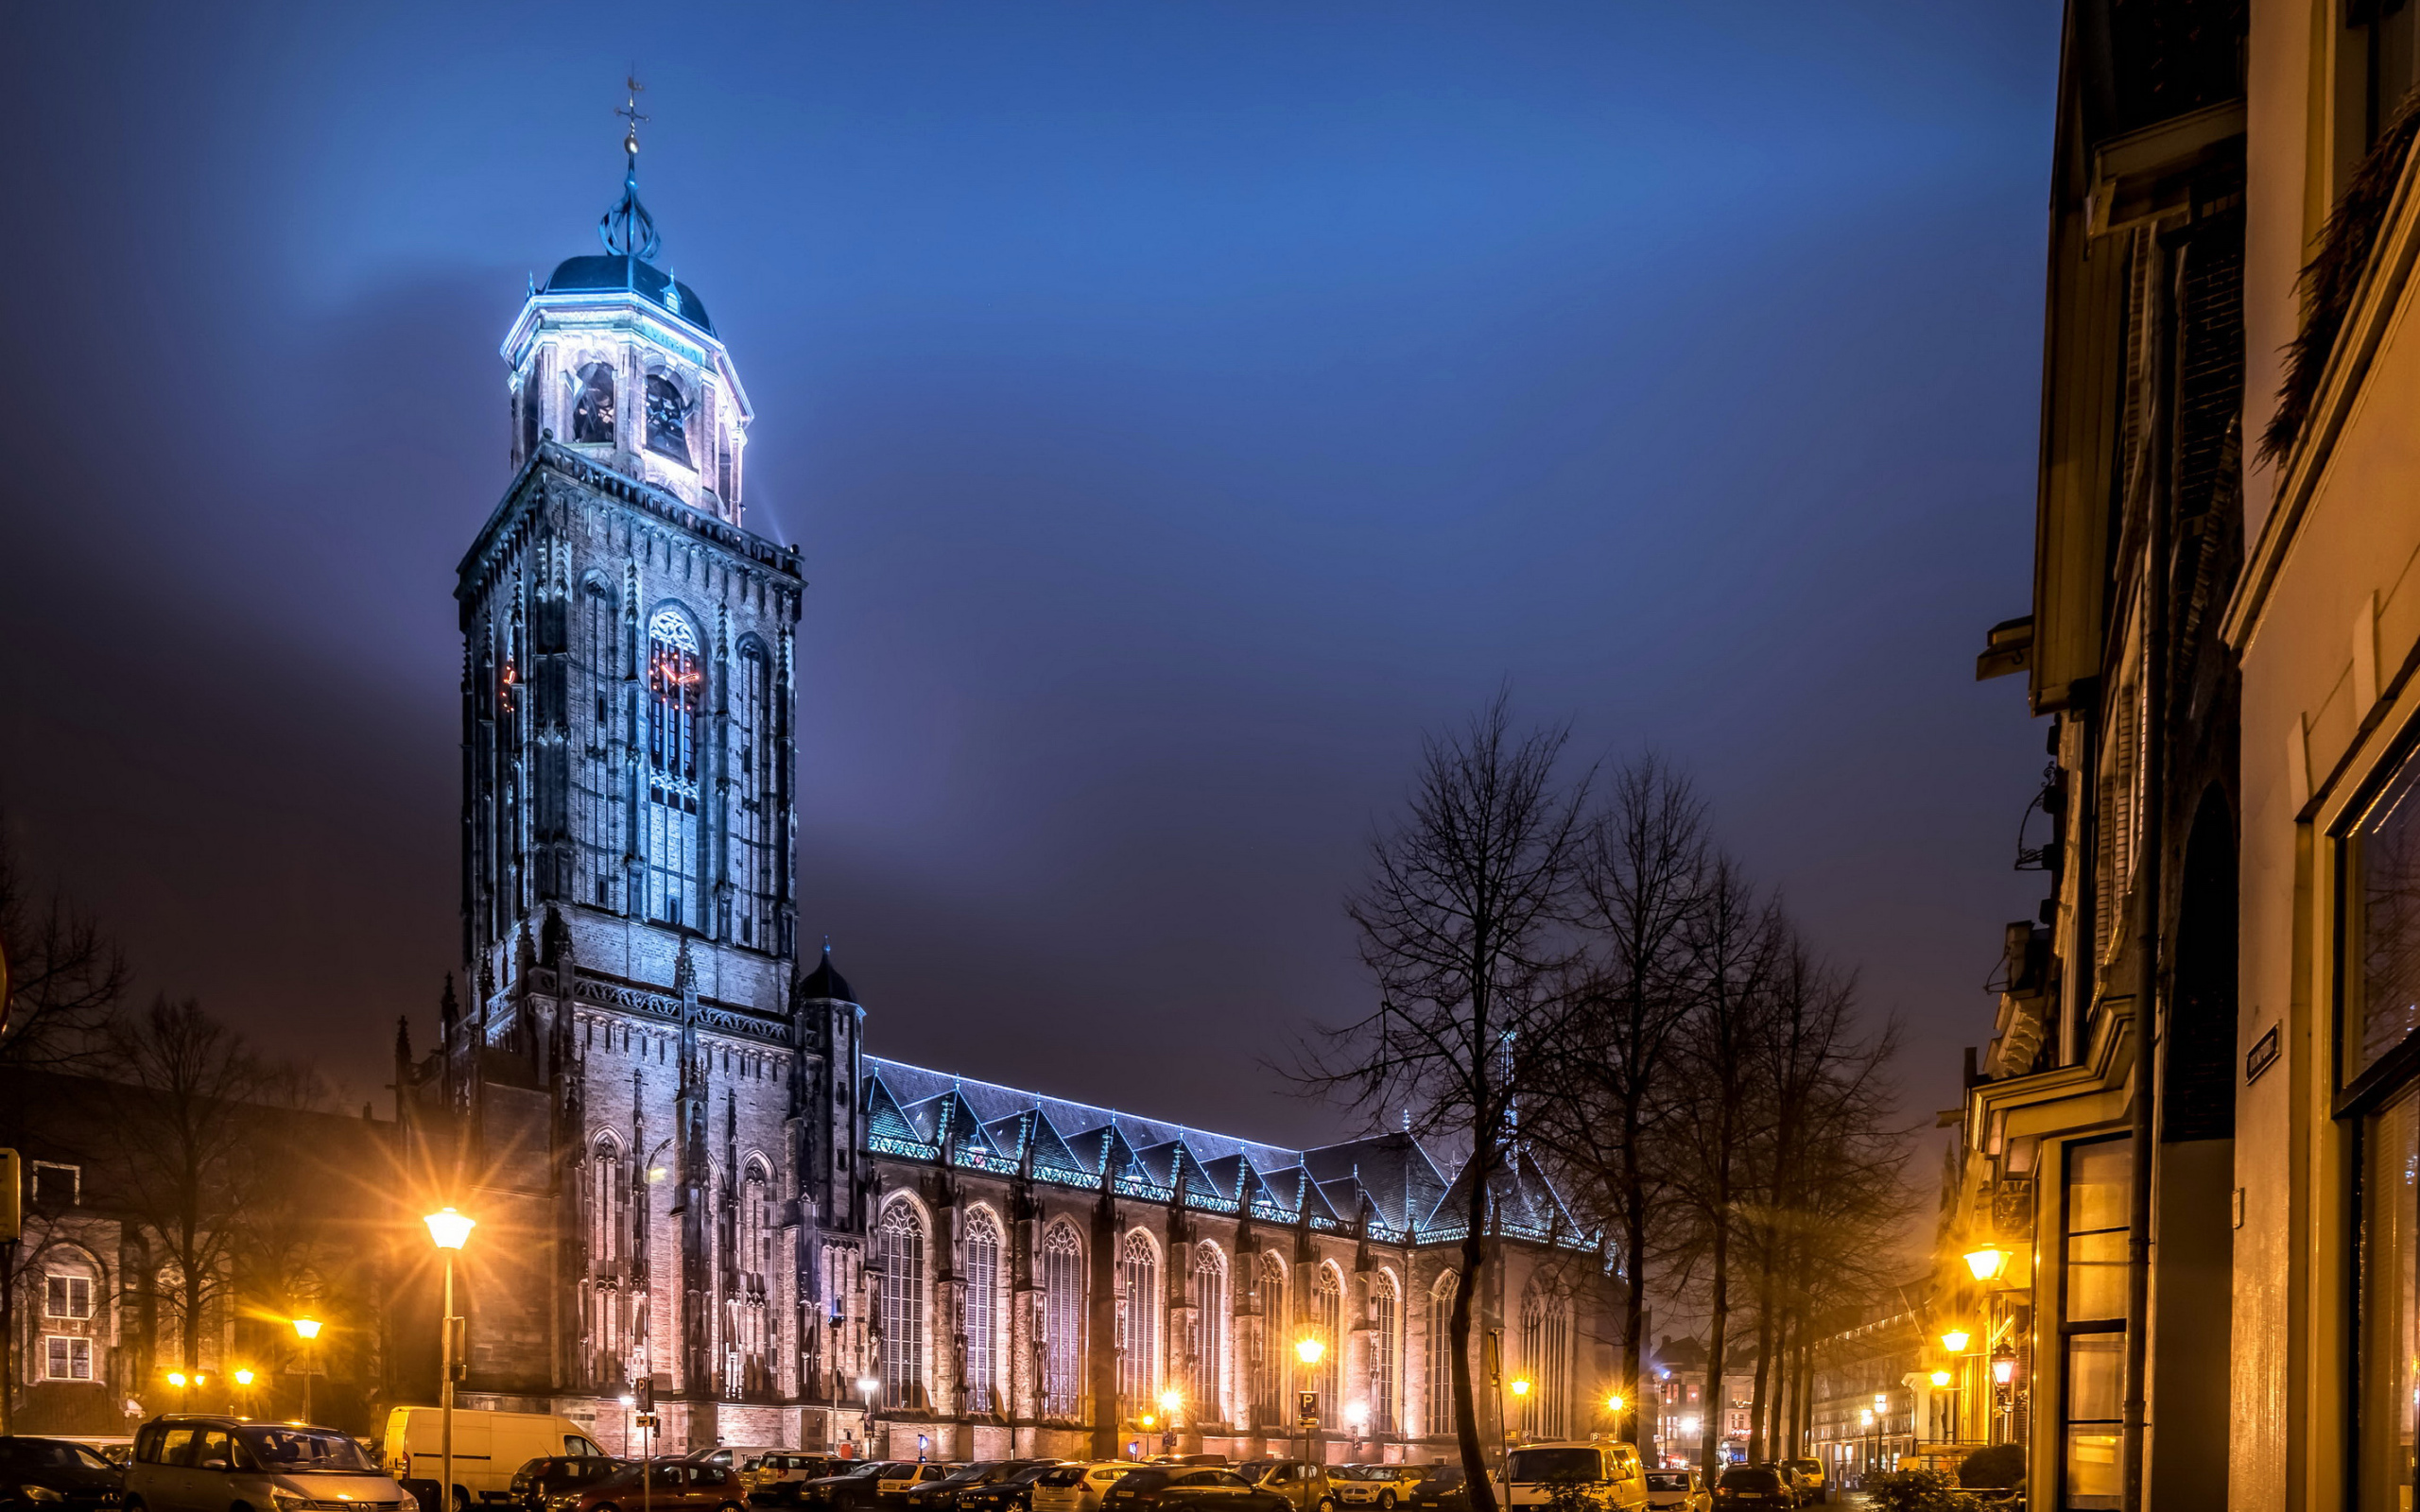 Temple in the light of street lamps on a night street in Deventer, Netherlands